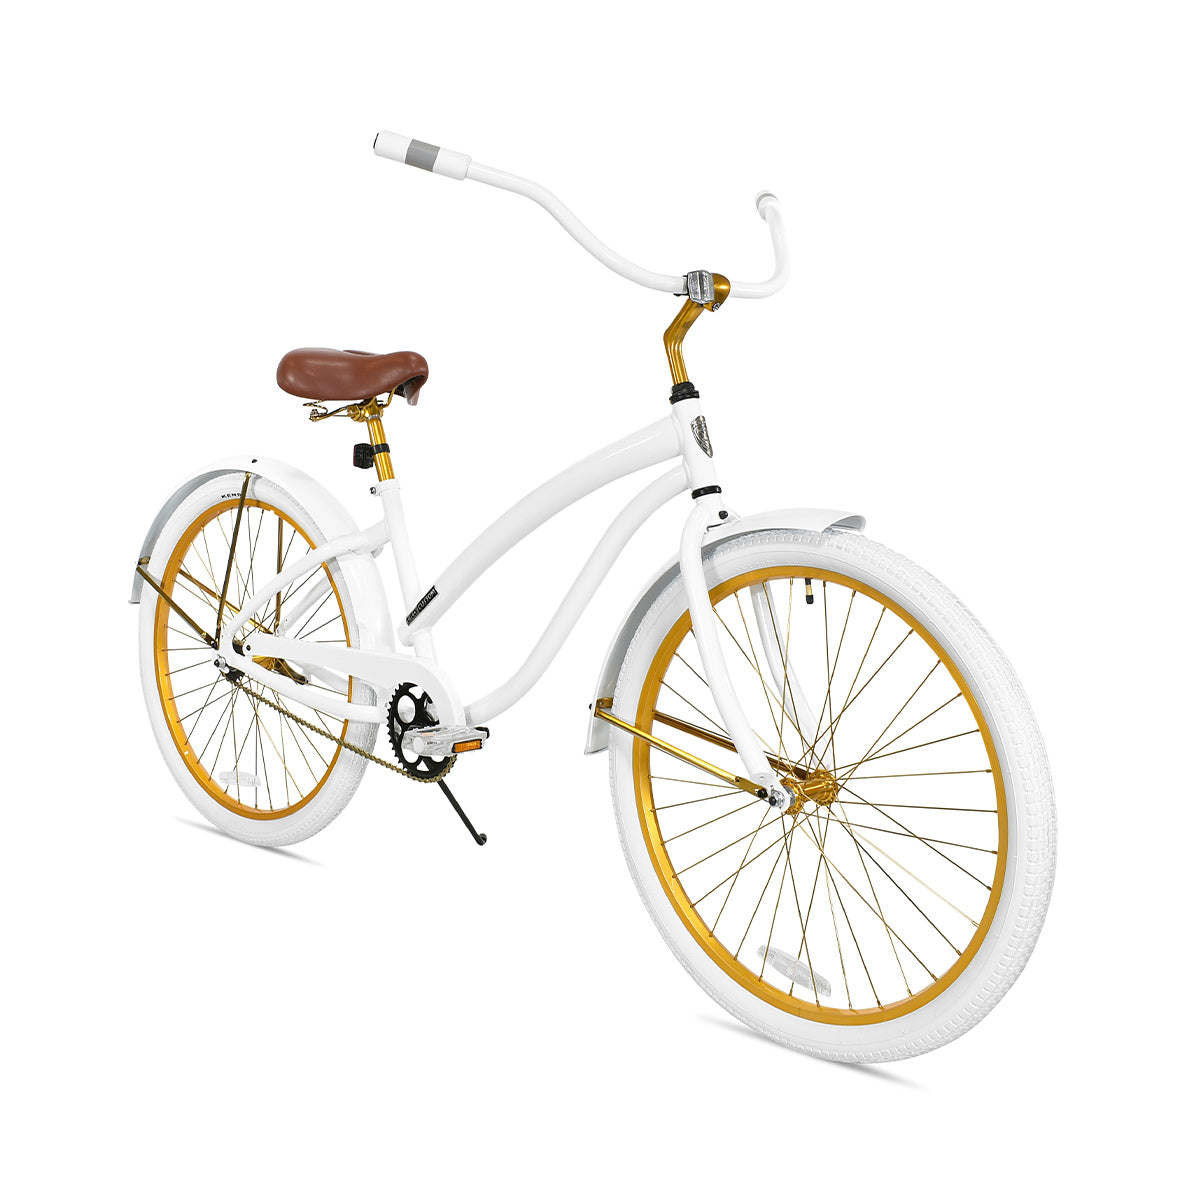 Dallas Single-Speed Cruiser with White Step-Thru Frame, Tires, Fenders, Handlebar, and Grips Complimented with Silver and Gold Wheels, Spokes, Fender Brace, Chain, and Posts with a Brown Saddle